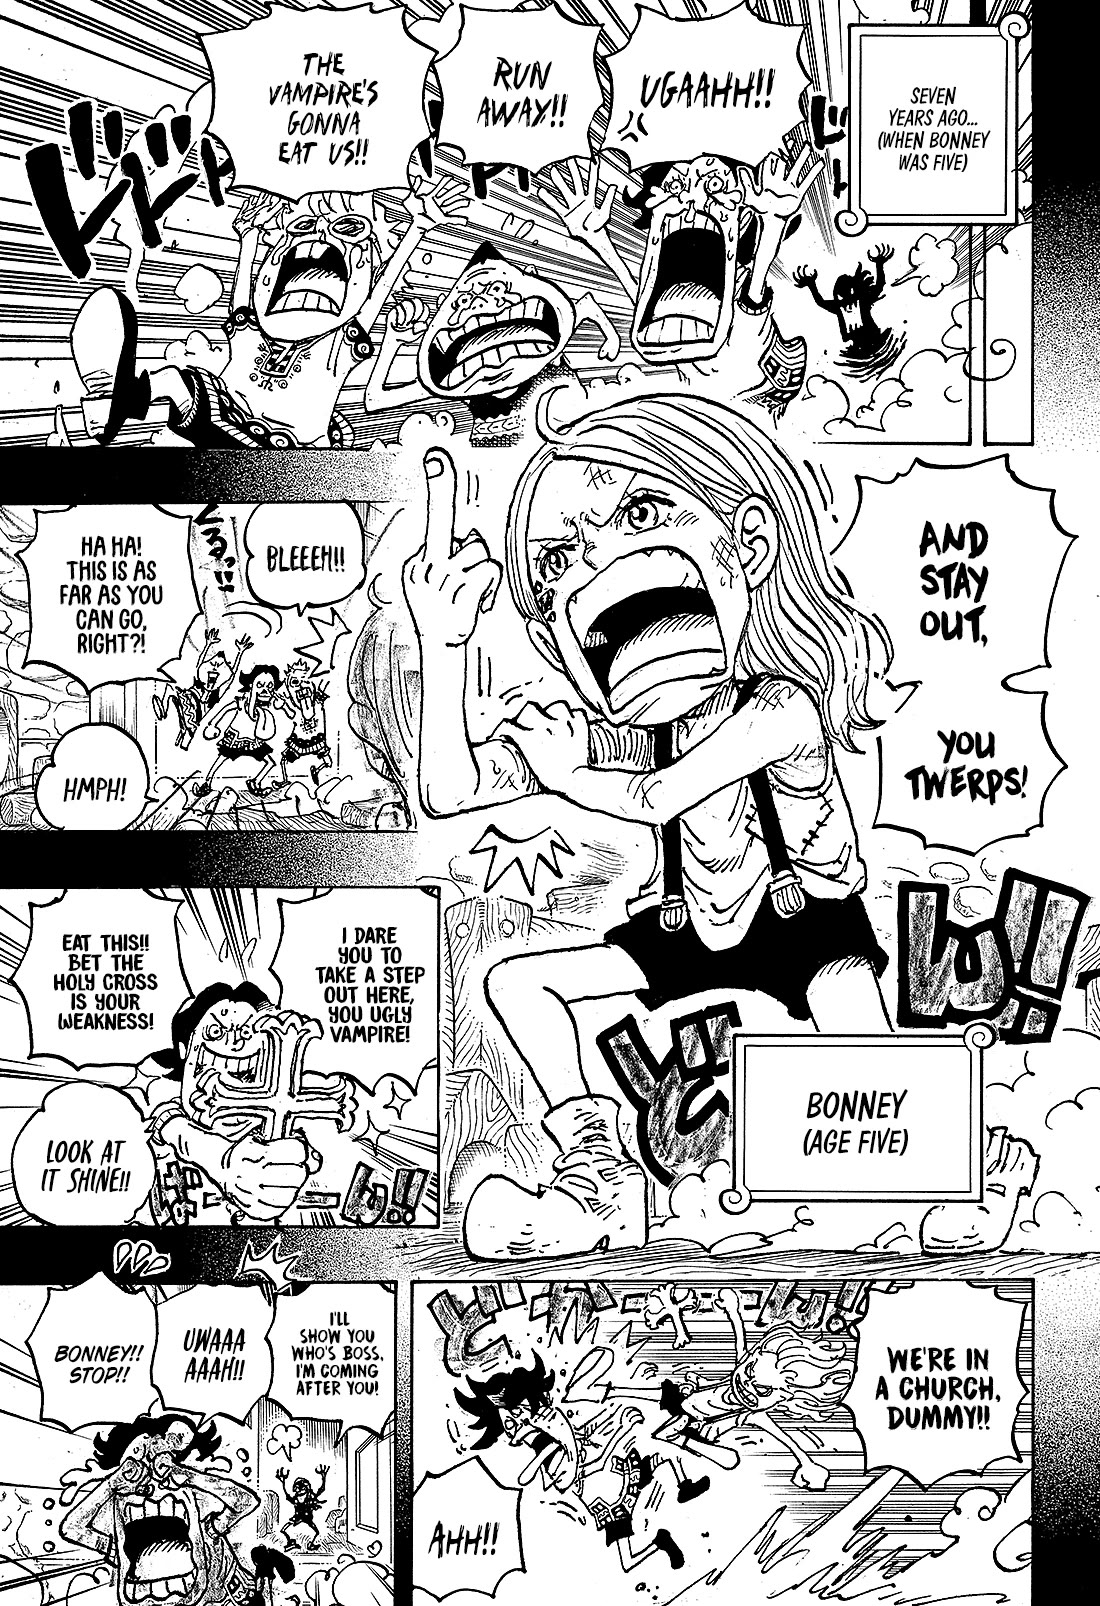 One Piece: Chapter 1023 - Official Release Discussion : r/OnePiece